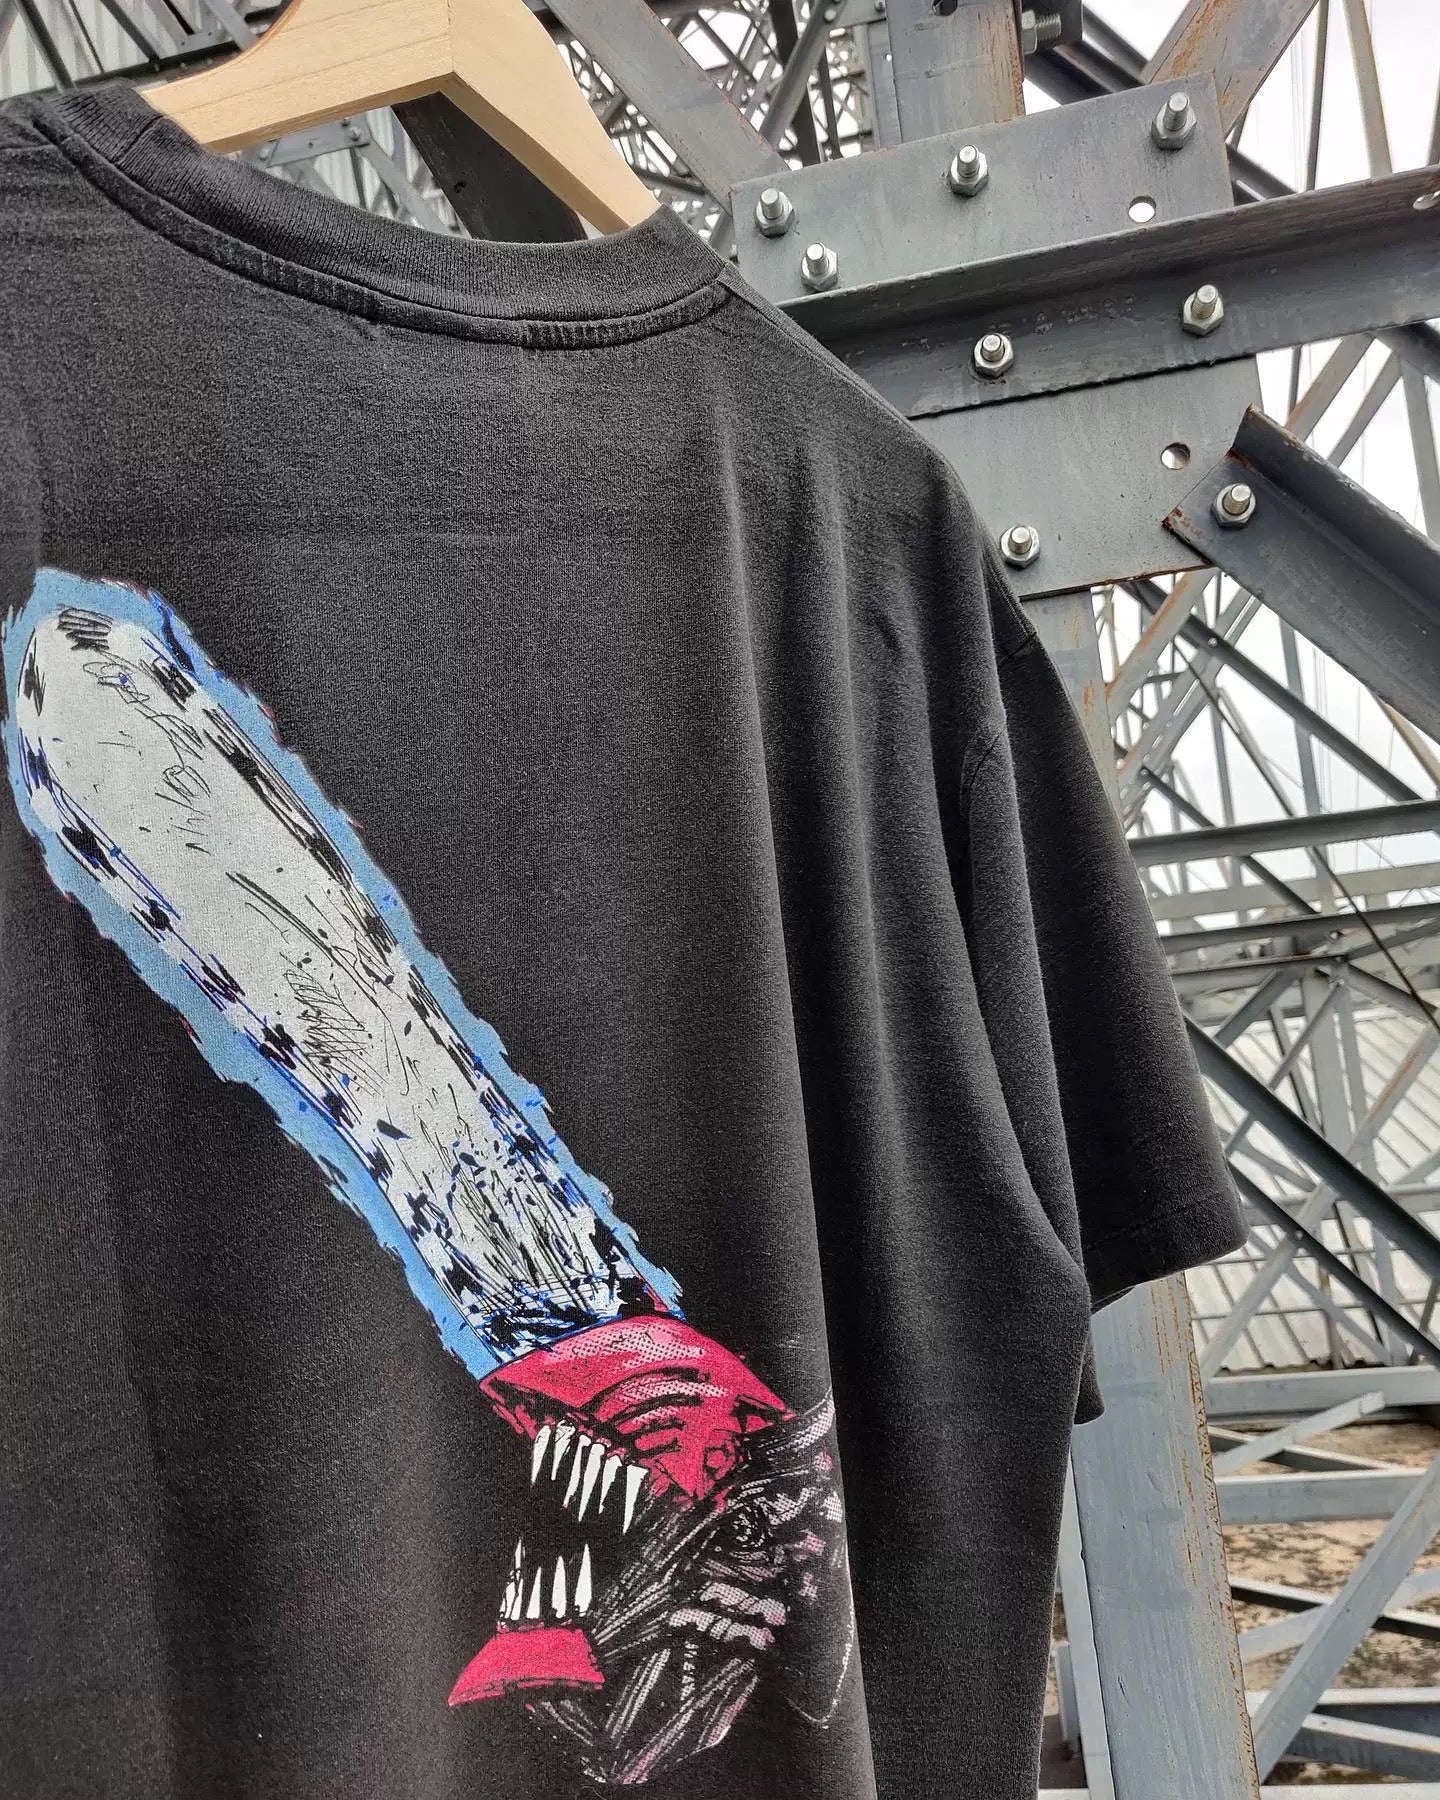 Collections Chainsaw Man T-Shirt